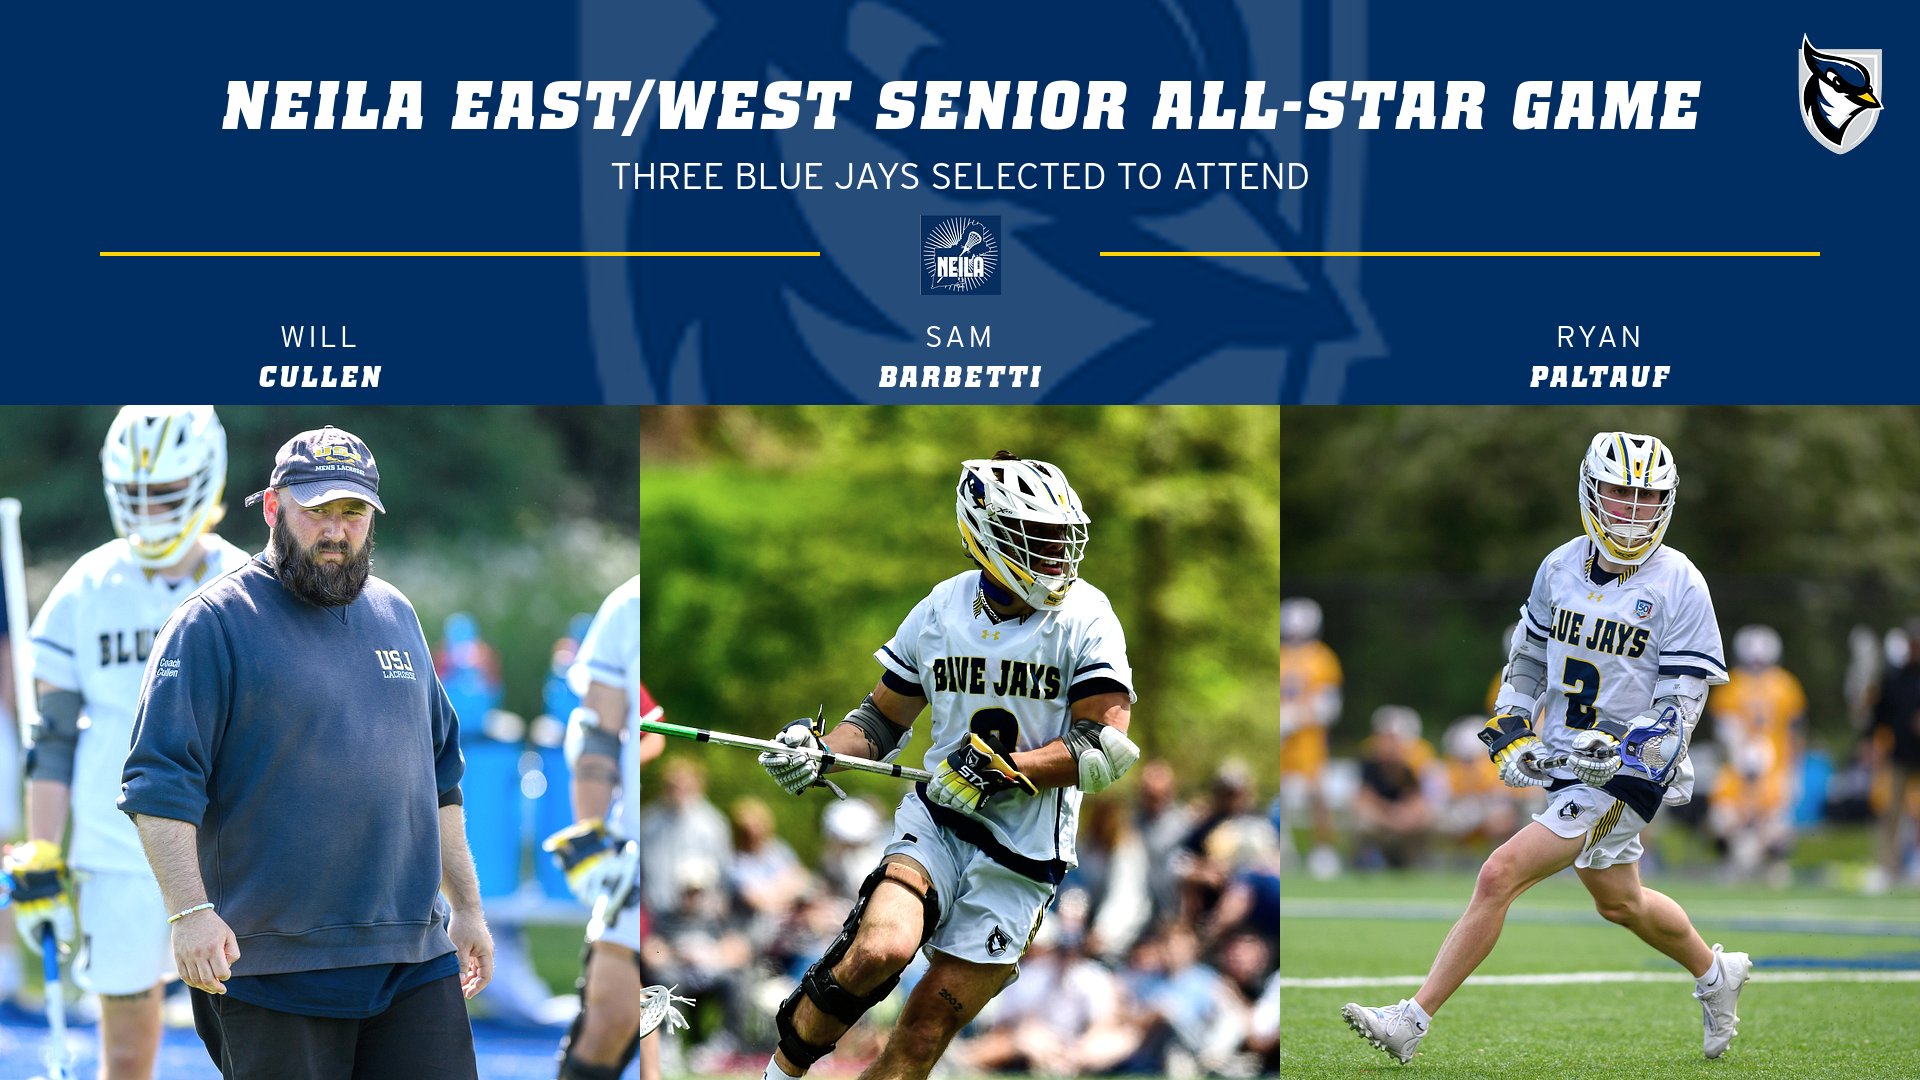 Barbetti and Paltauf Selected to Play in NEILA East/West Senior All-Star Game, Cullen to Coach West Team